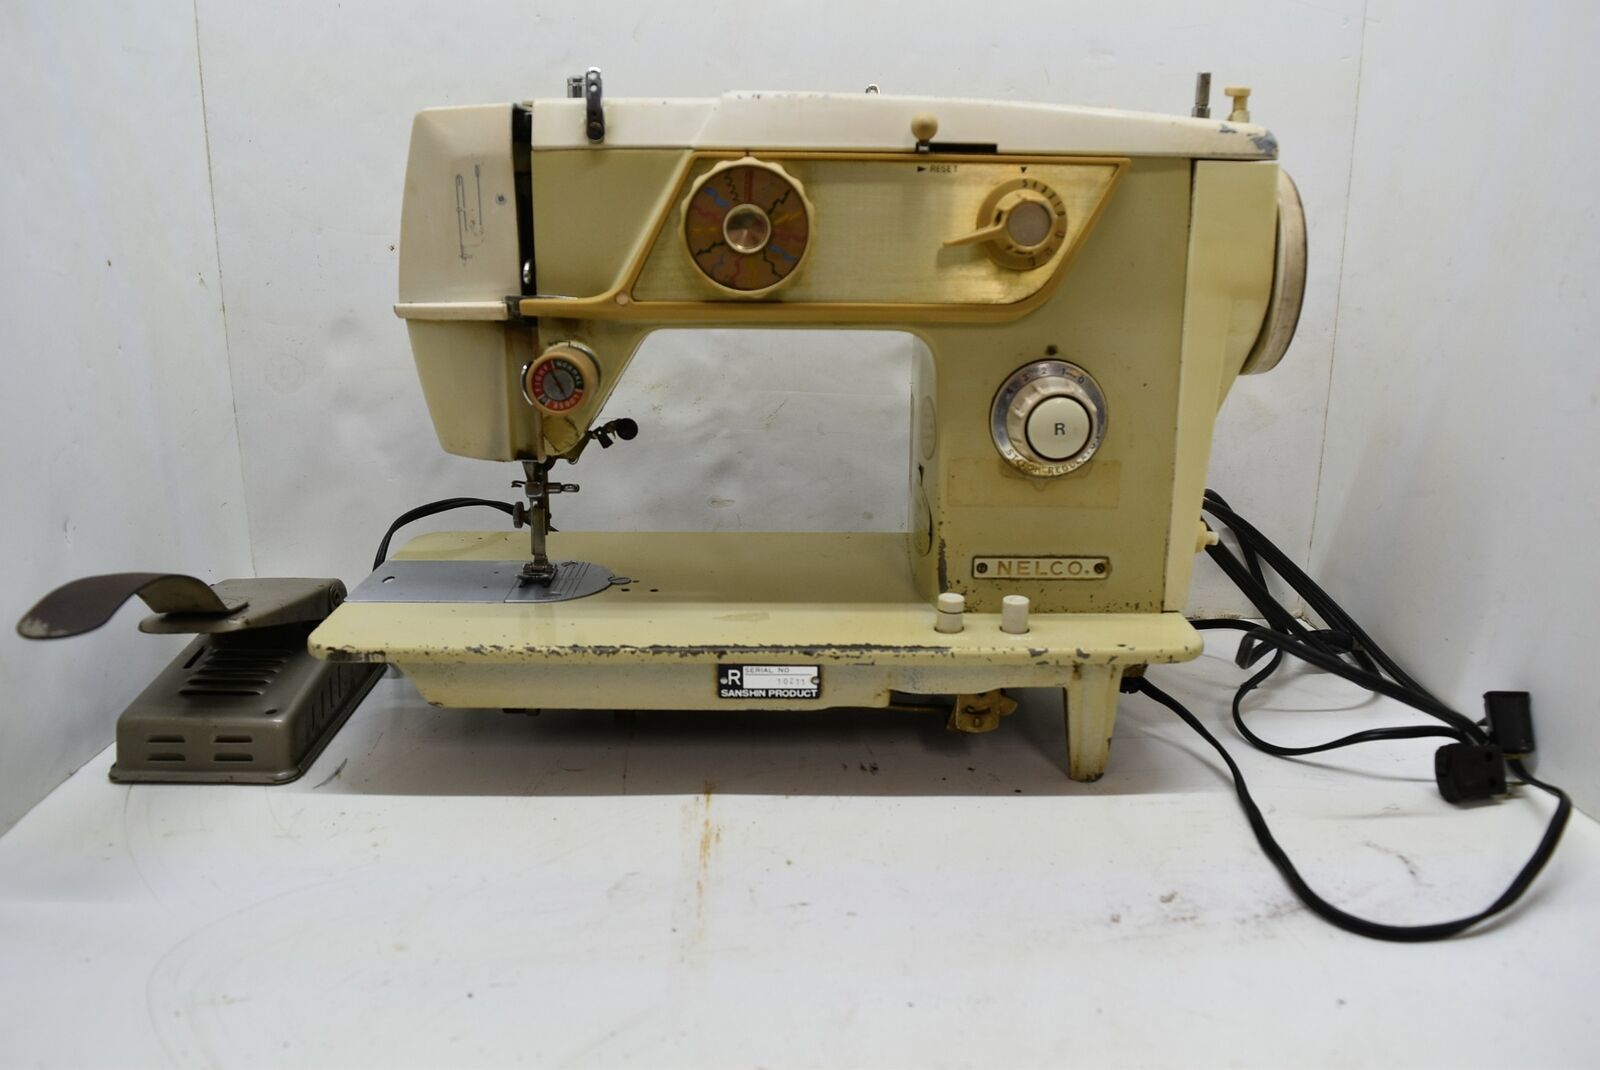 Vintage Nelco Sewing Machine Golden Stitch Series She Shed W/ Pedal